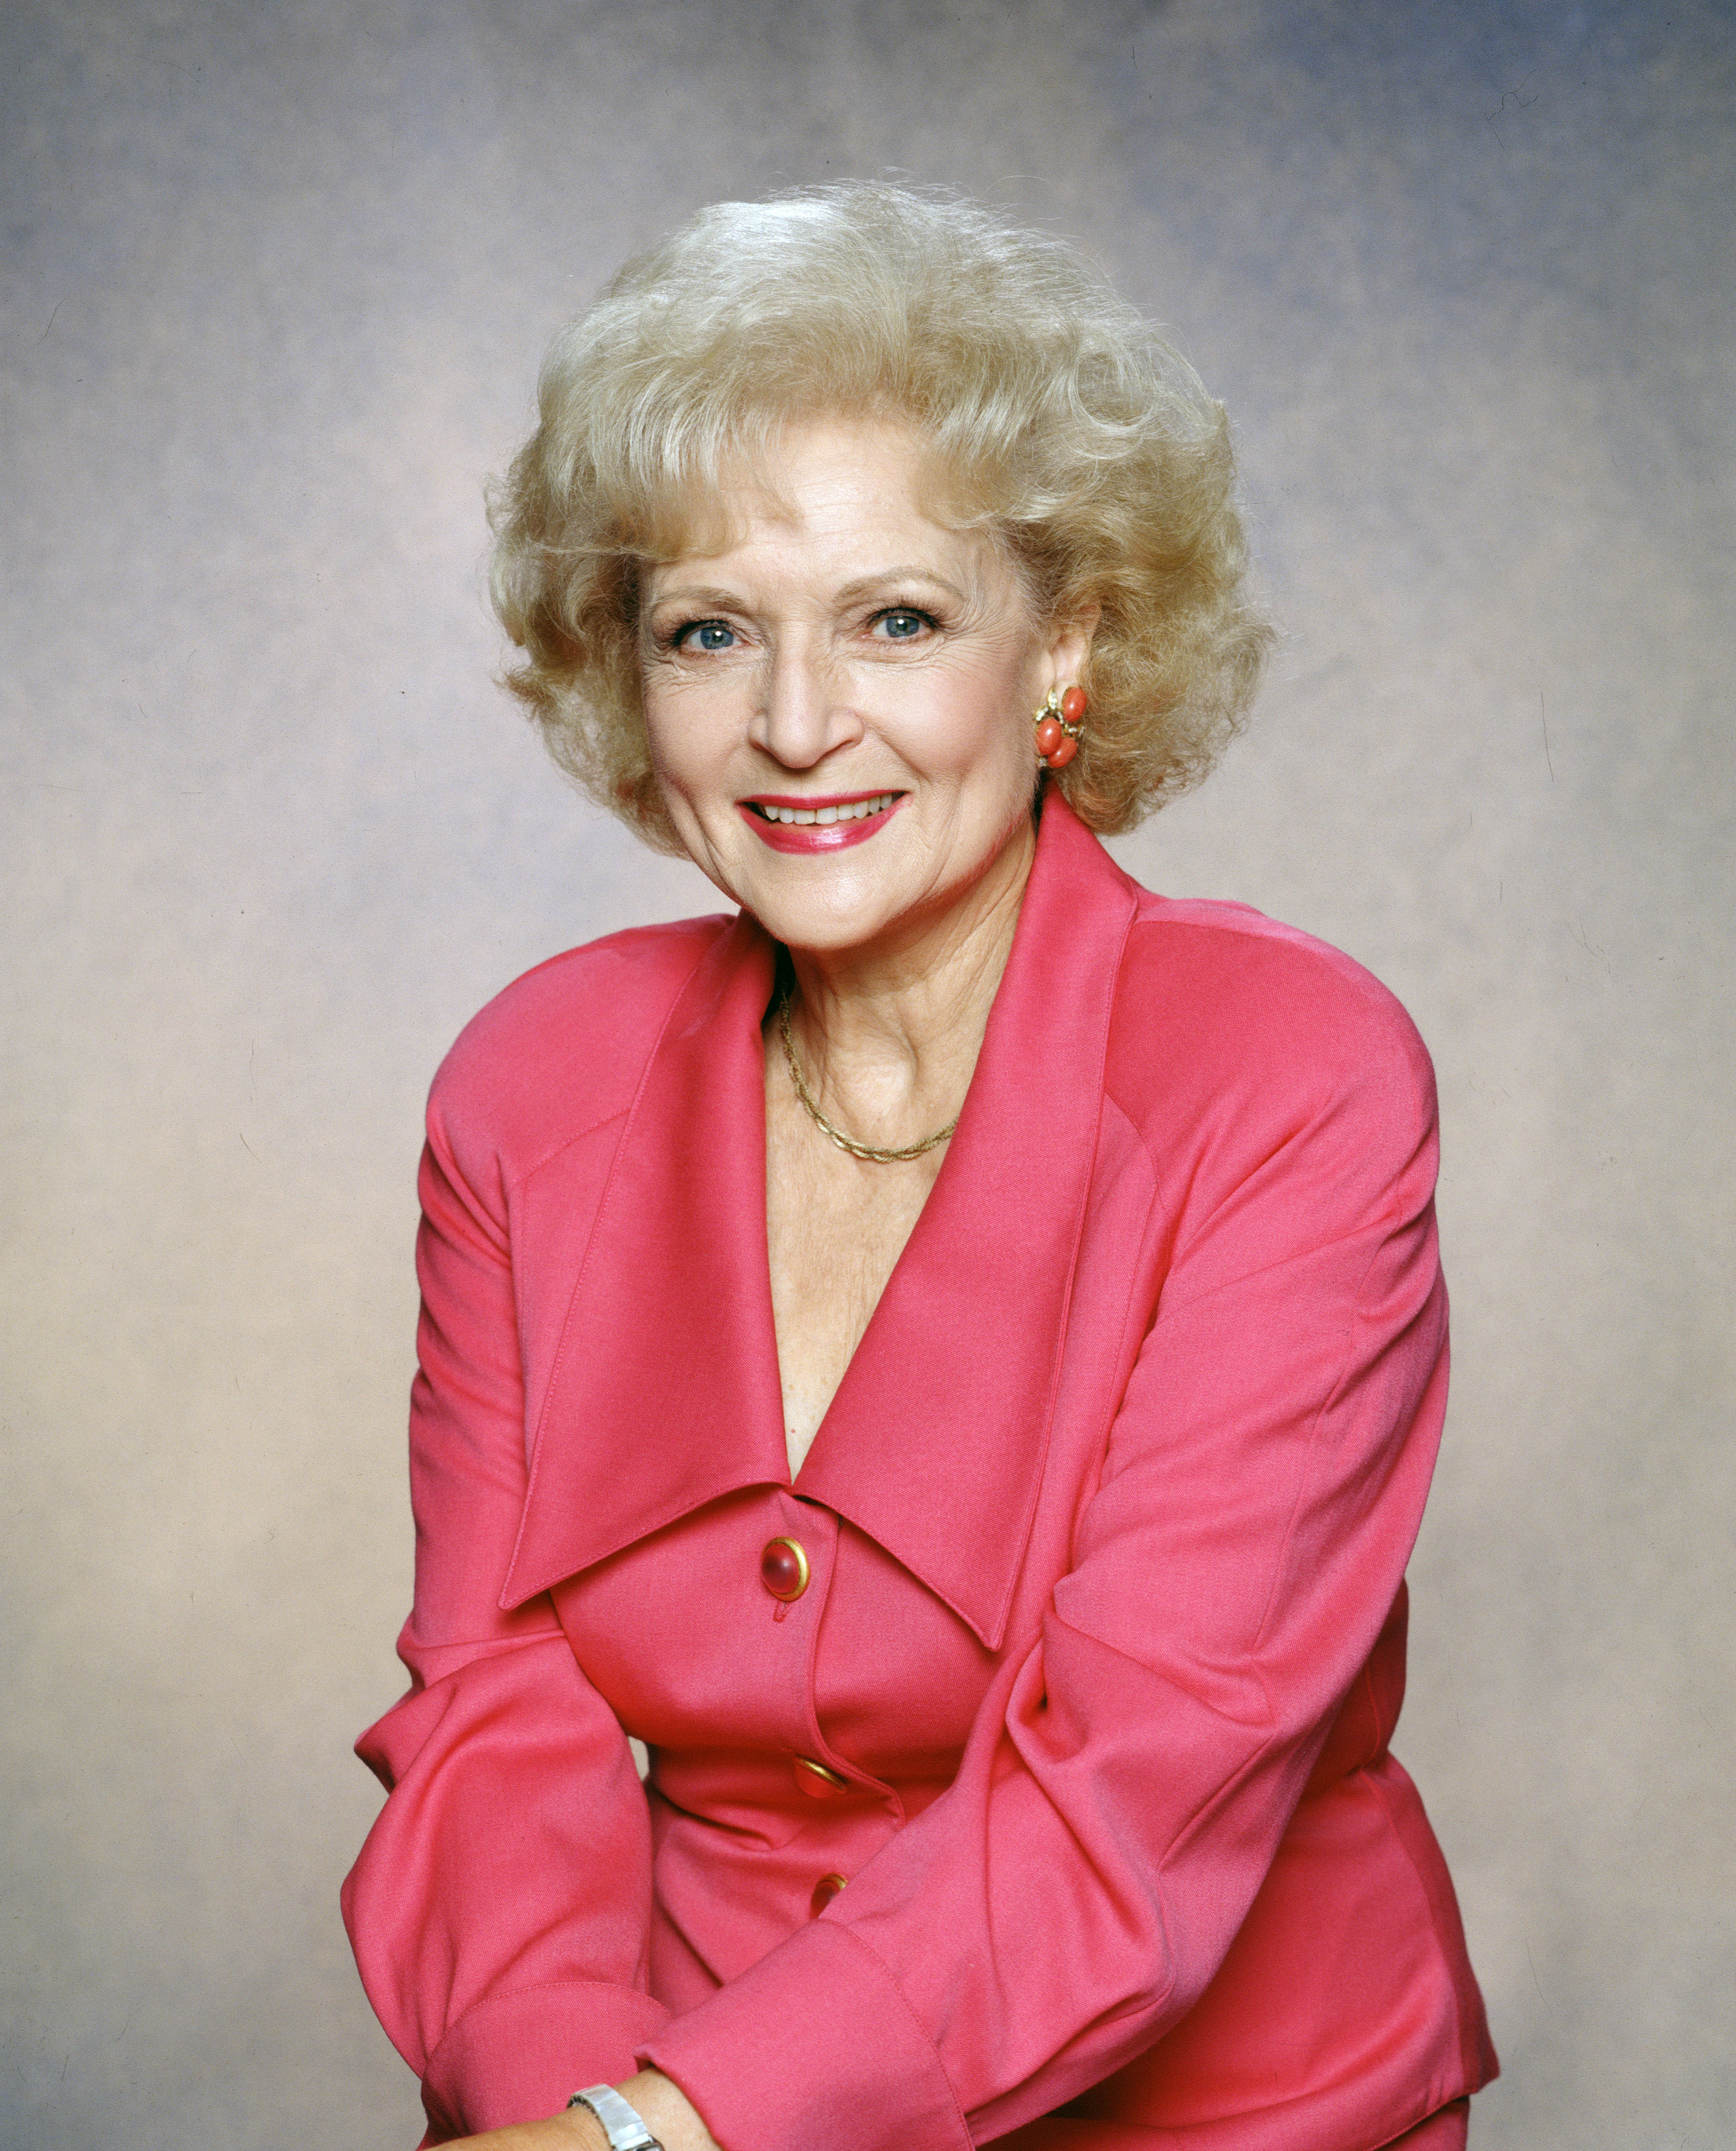 Betty White poses smiling in a buttoned pink blazer with lapels and matching earrings